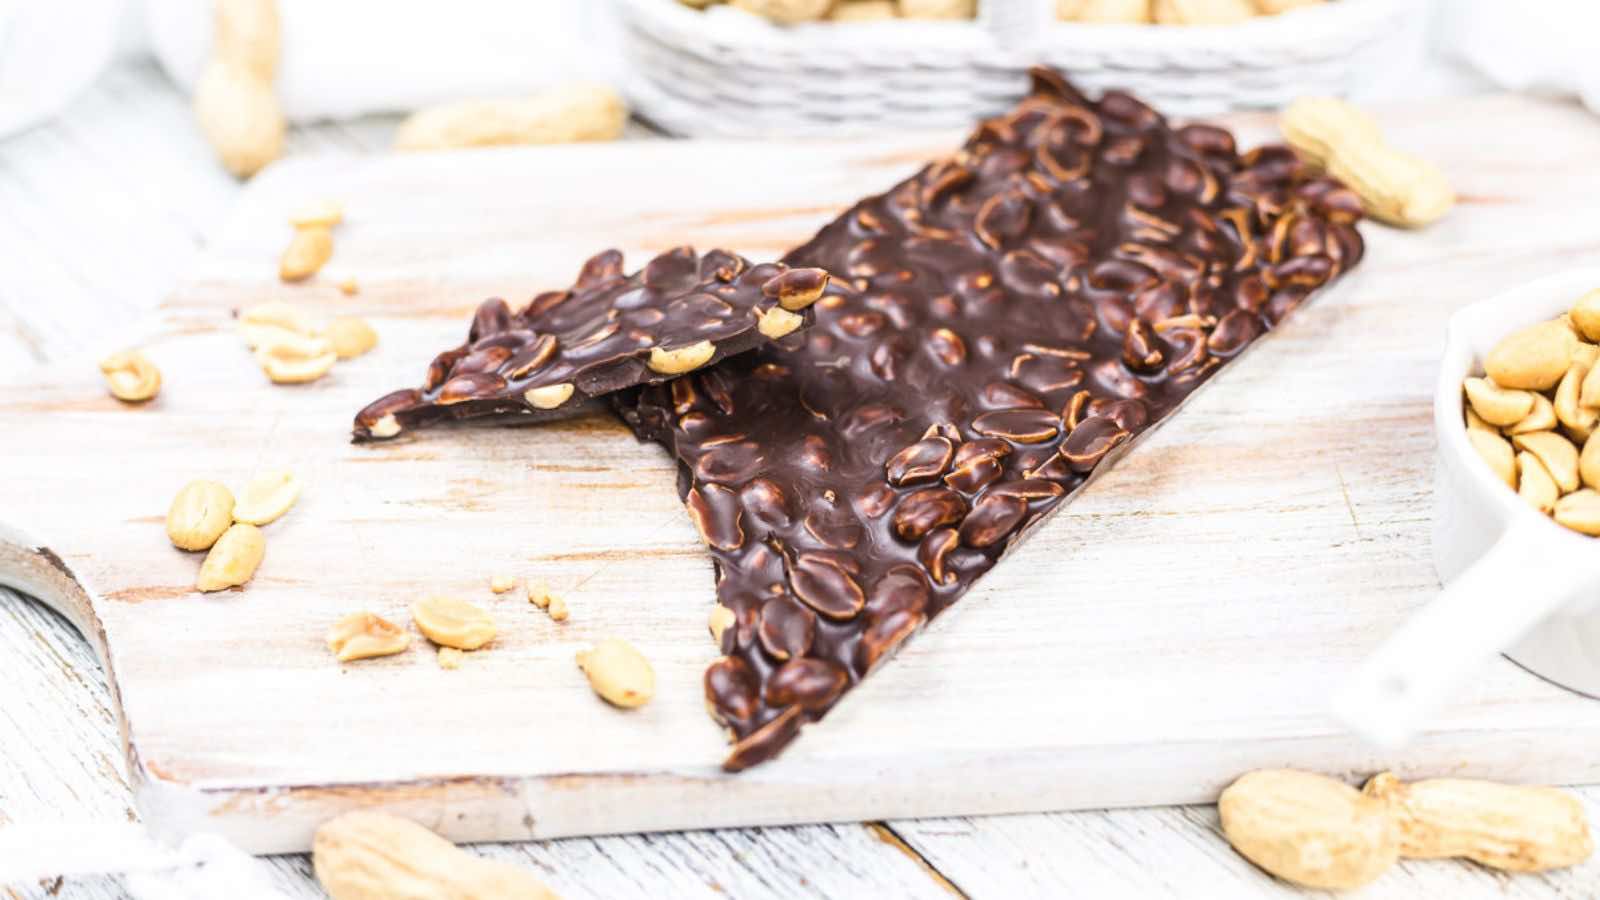 A piece of dark chocolate bark with peanuts on a wooden board.